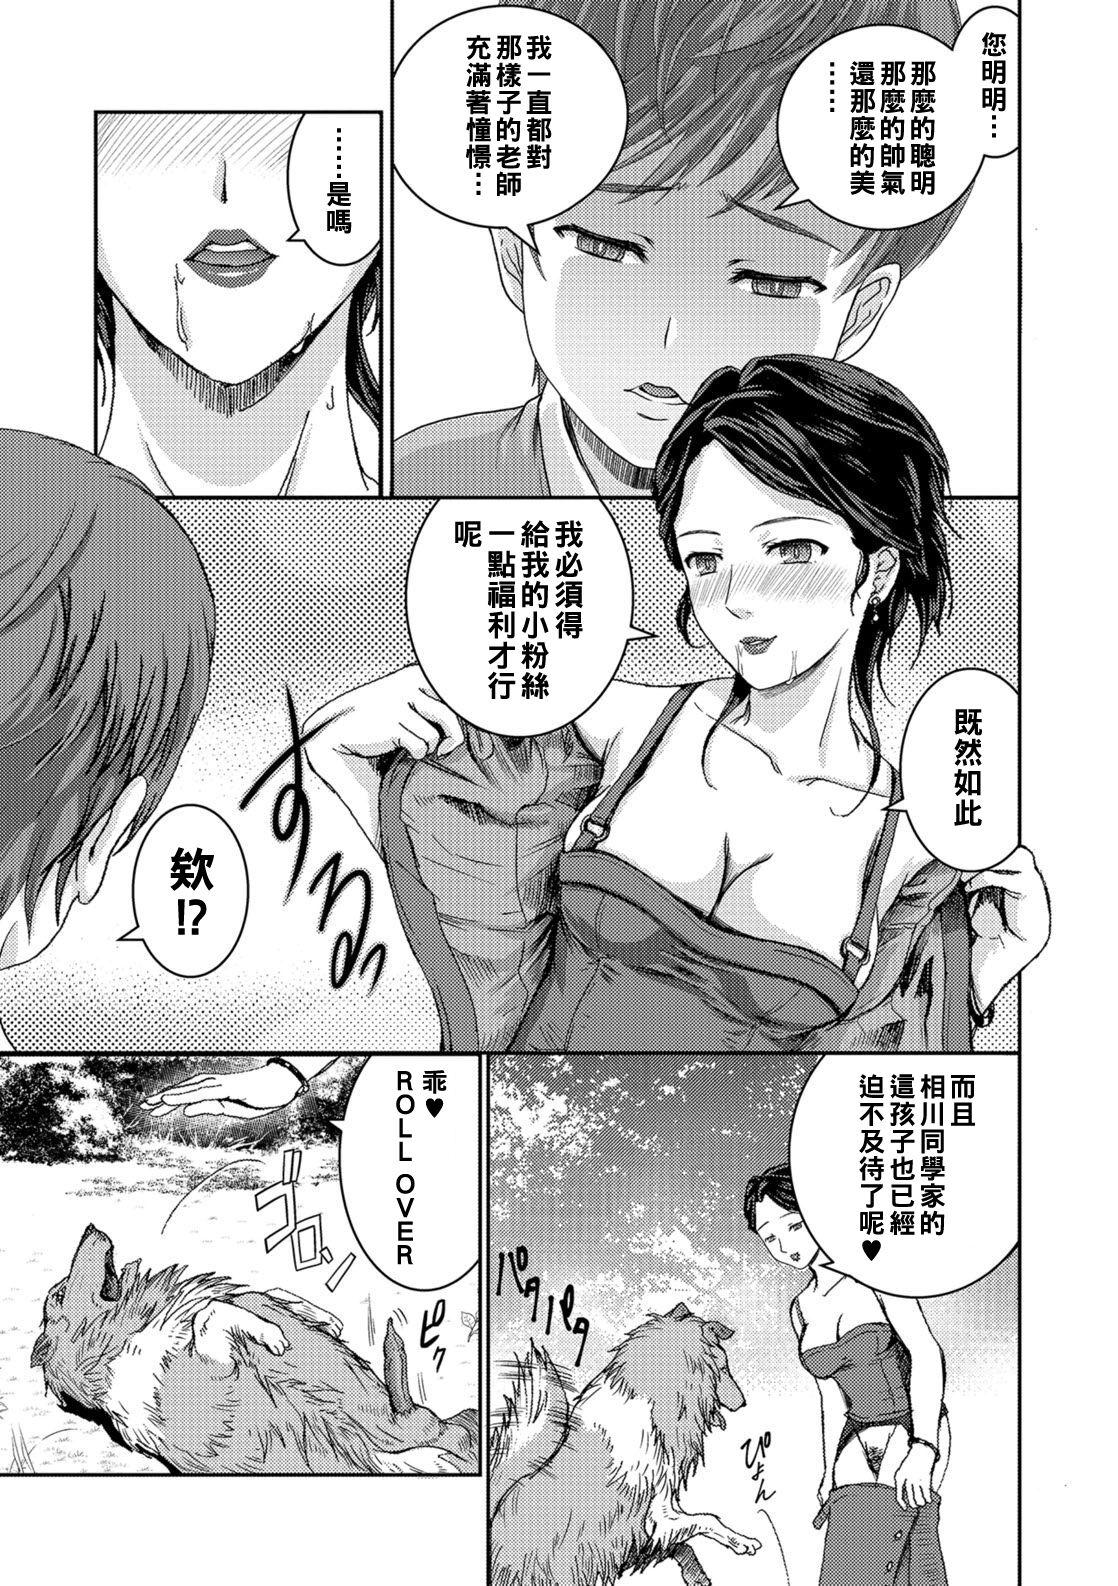 Blowjob Contest [竹壱おこめ] 仄暗き森の隷属 -The SUIT and DOG-（Chinese） Perfect Body - Page 11